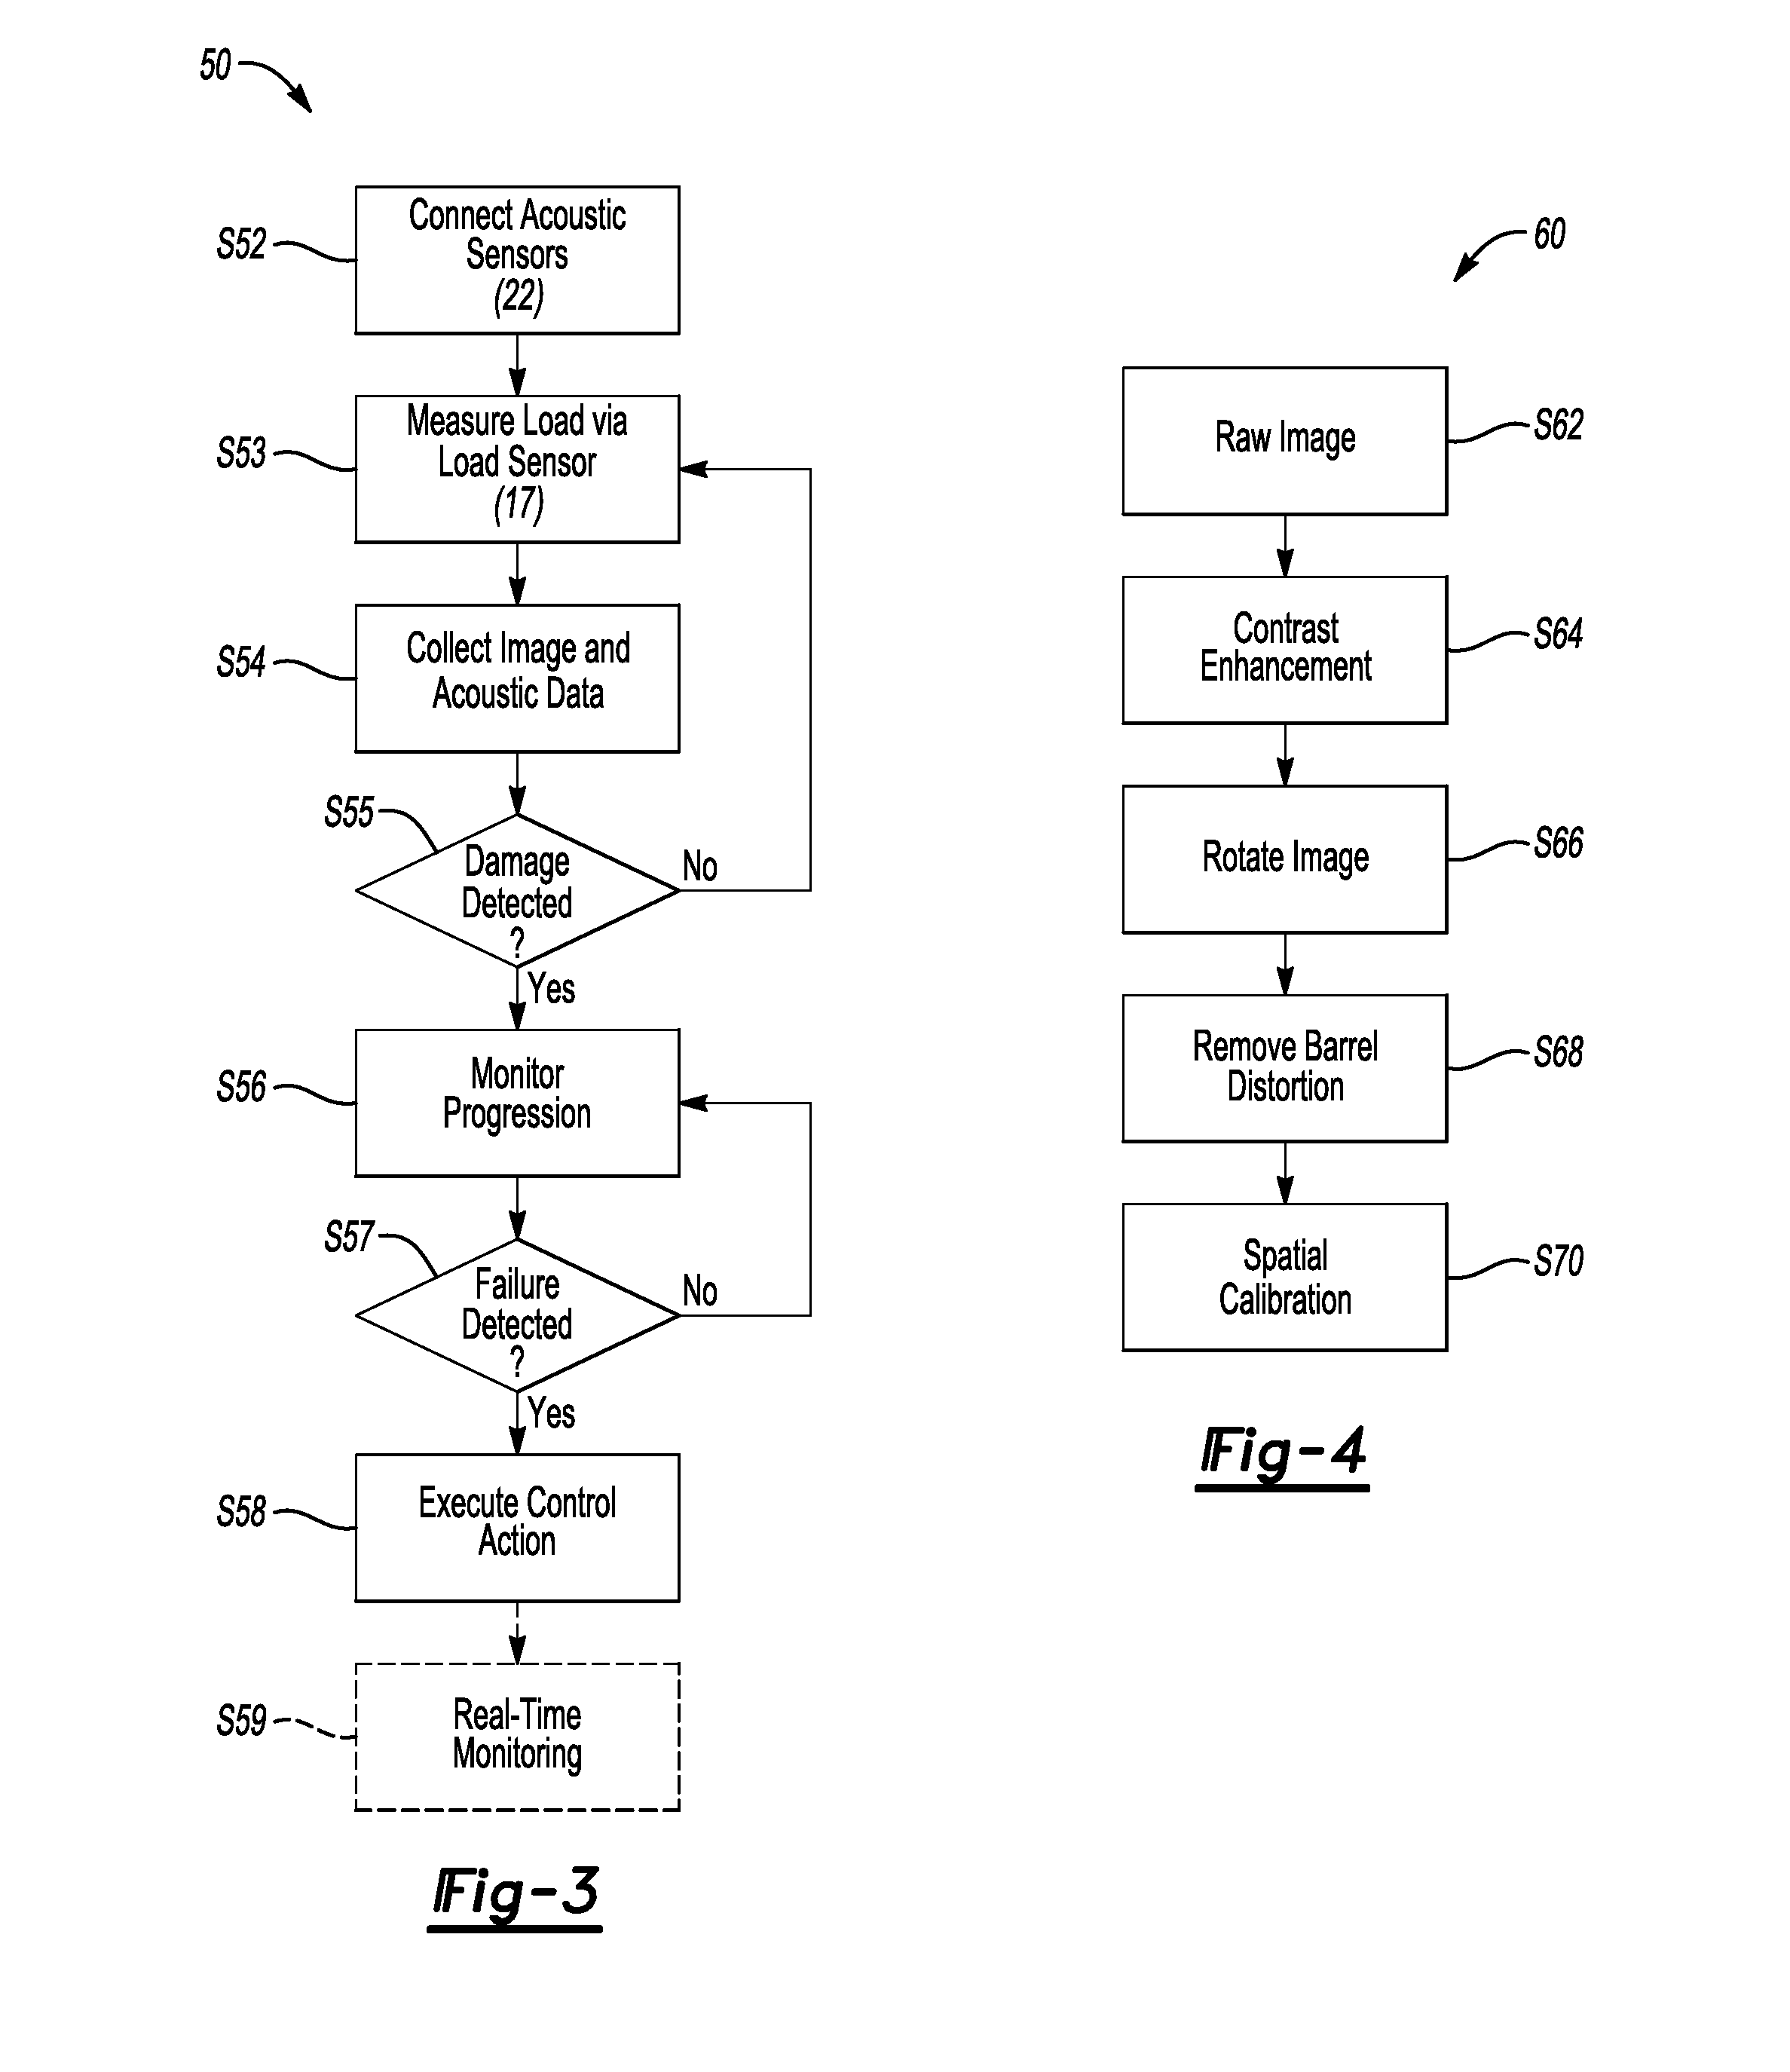 System and Method for Progressive Damage Monitoring and Failure Event Prediction in a Composite Structure